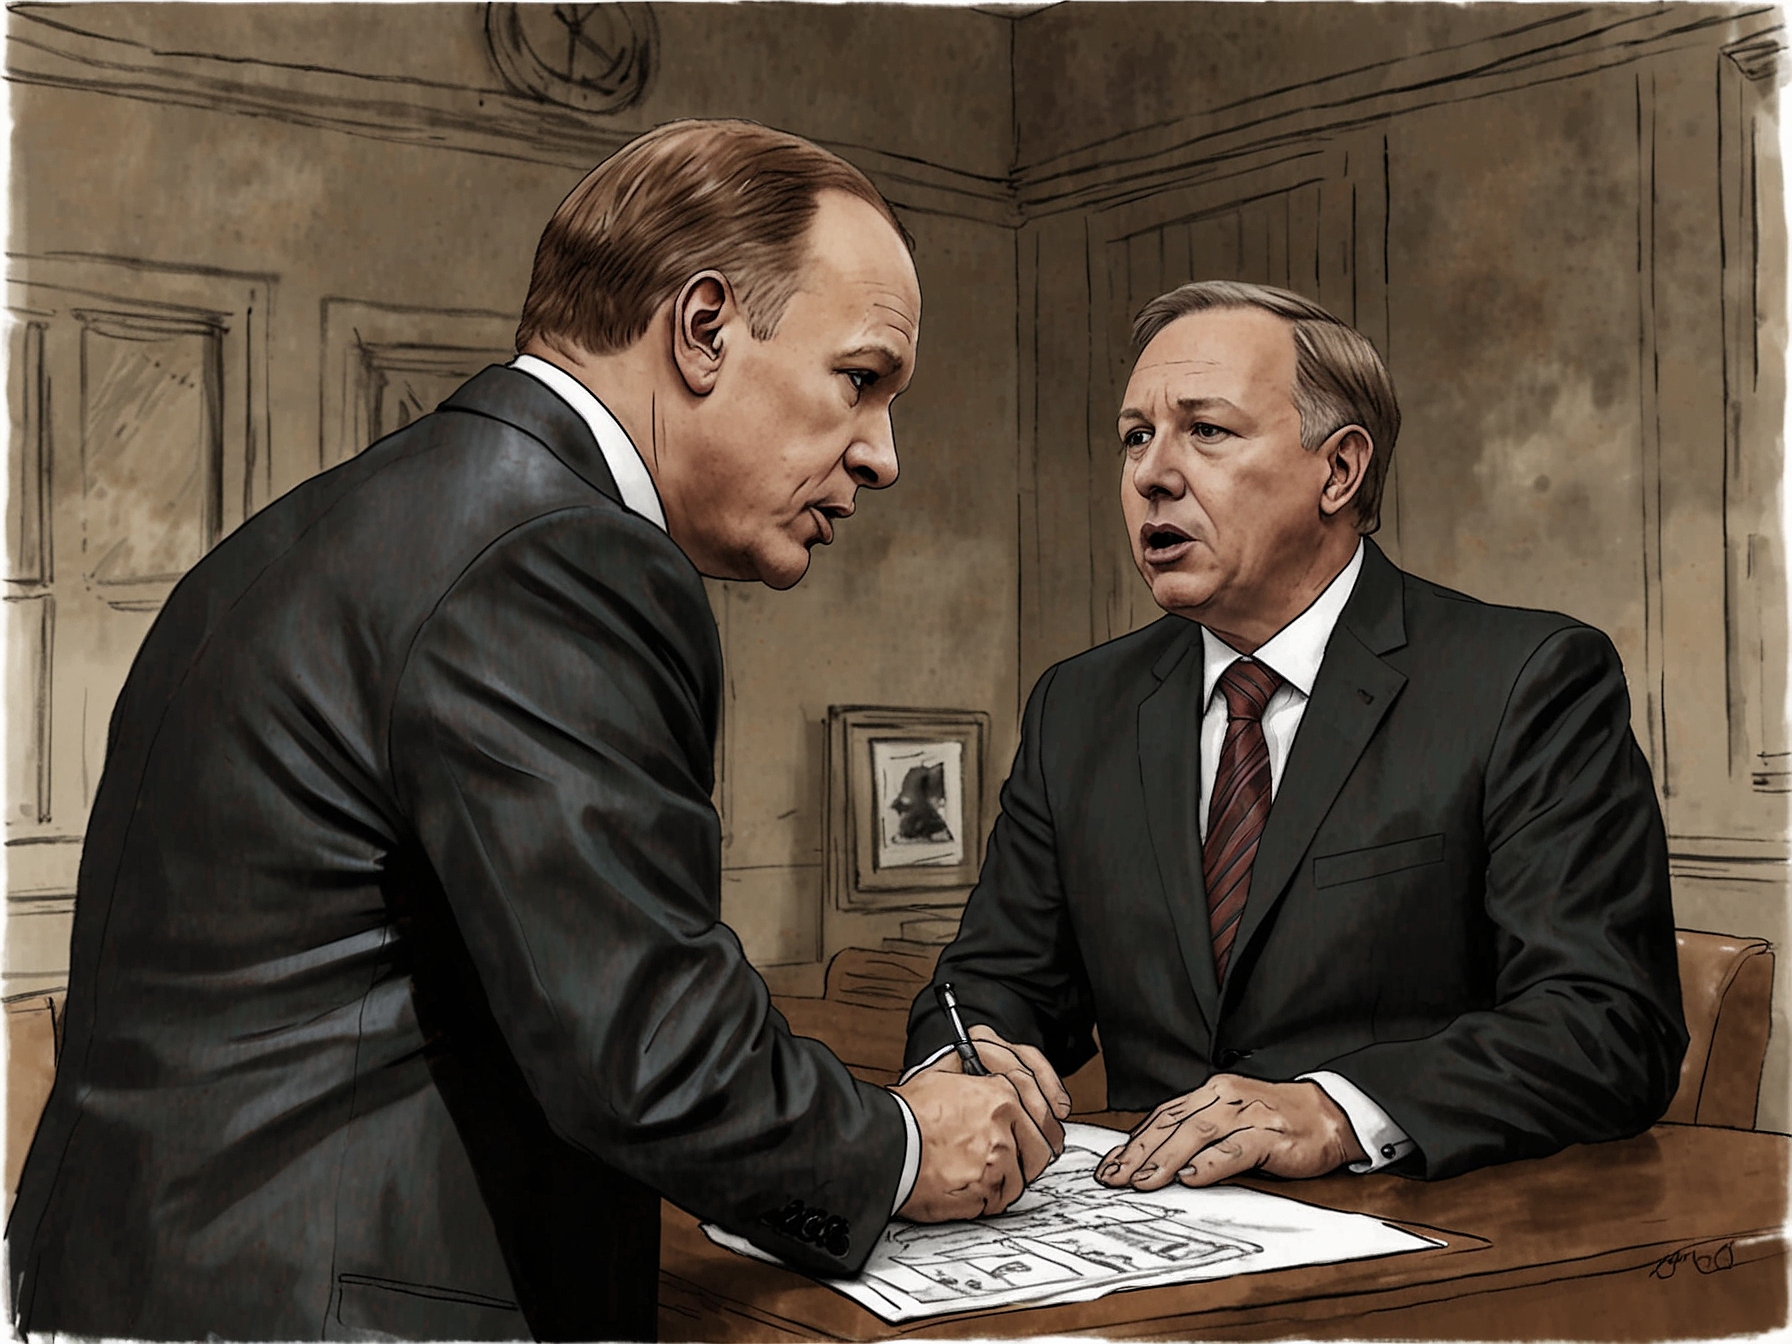 A political cartoon depicting opposition leader Peter Dutton and PM Anthony Albanese debating the nuclear proposal, highlighting the conflicting views and public skepticism.